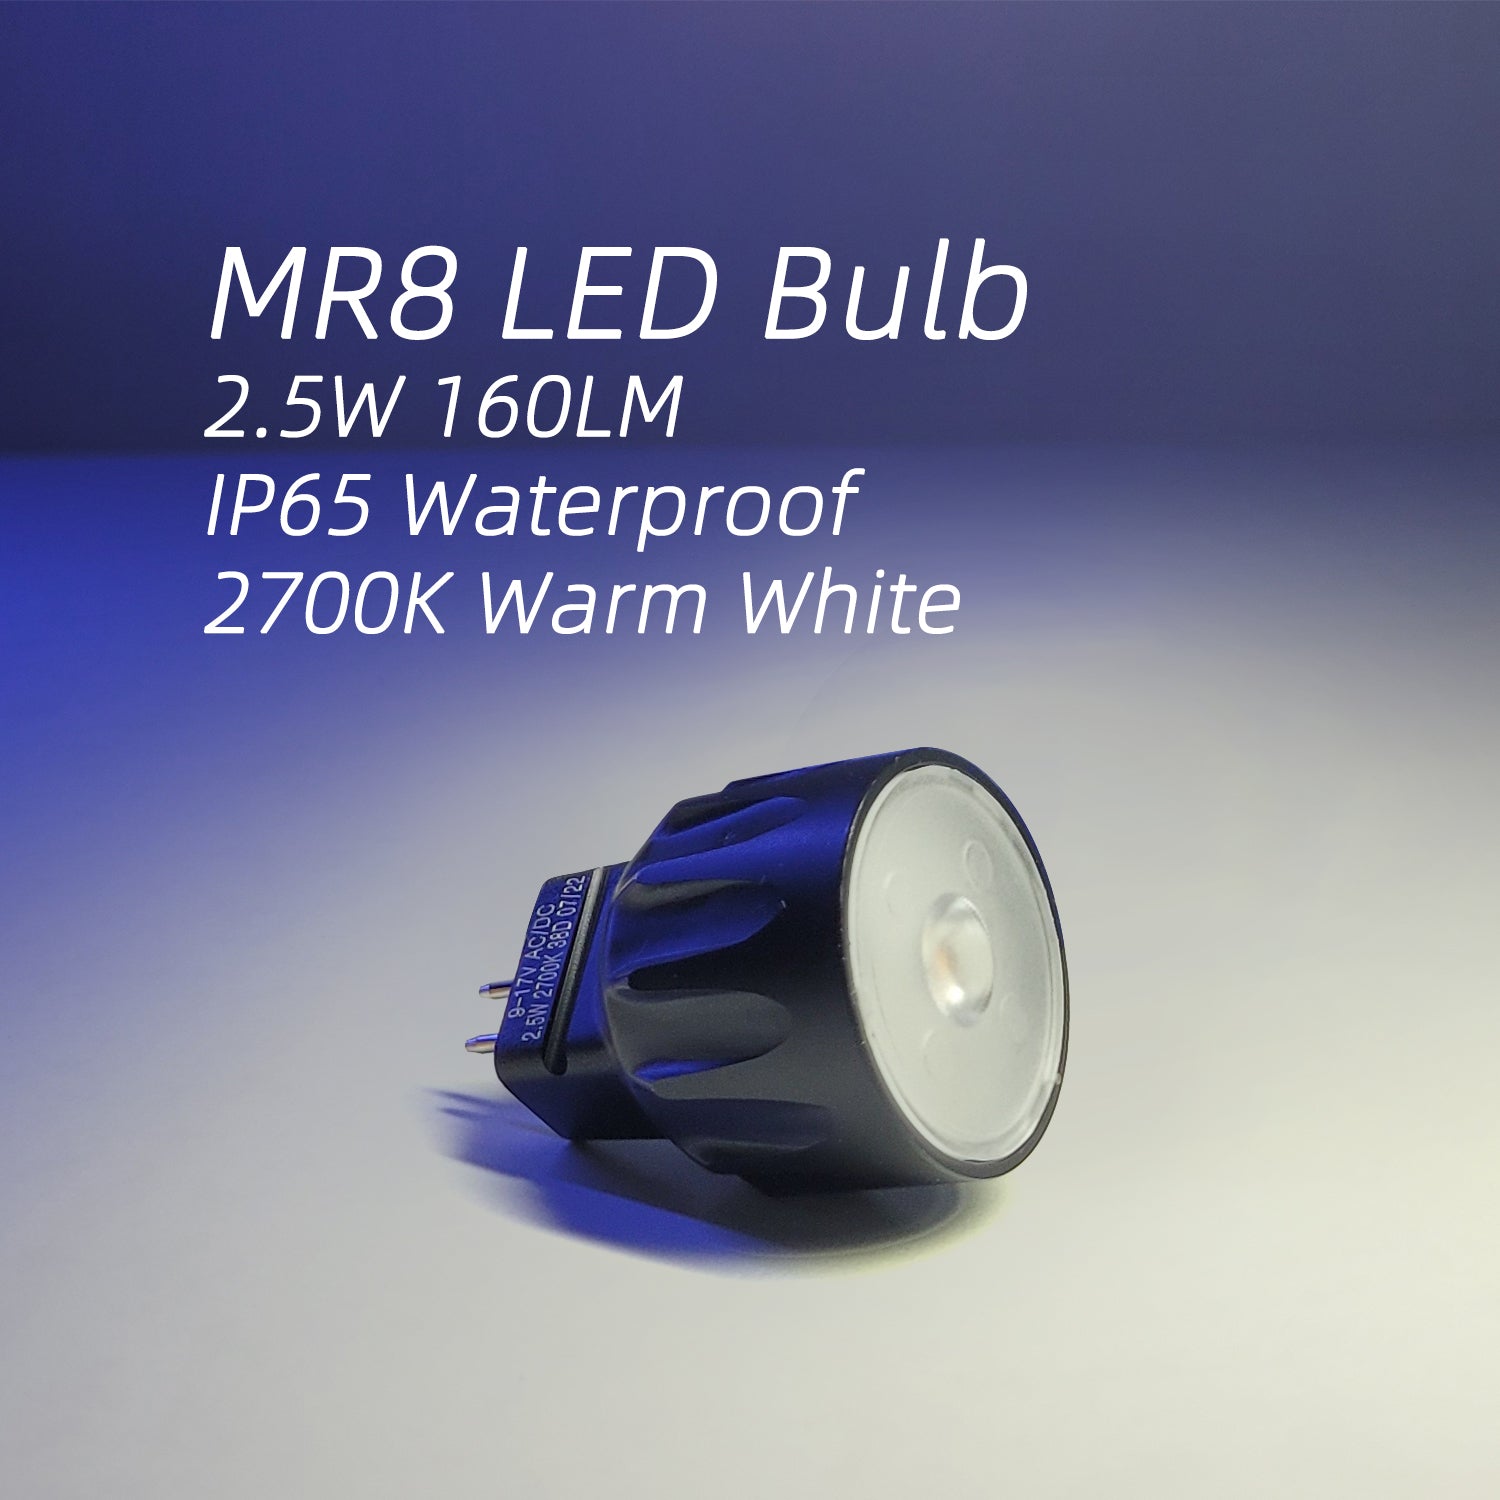 MR8 LED Bulb, 2.5W 160LM, IP65 Waterproof, 2700K Warm White on smooth surface with gradient blue background